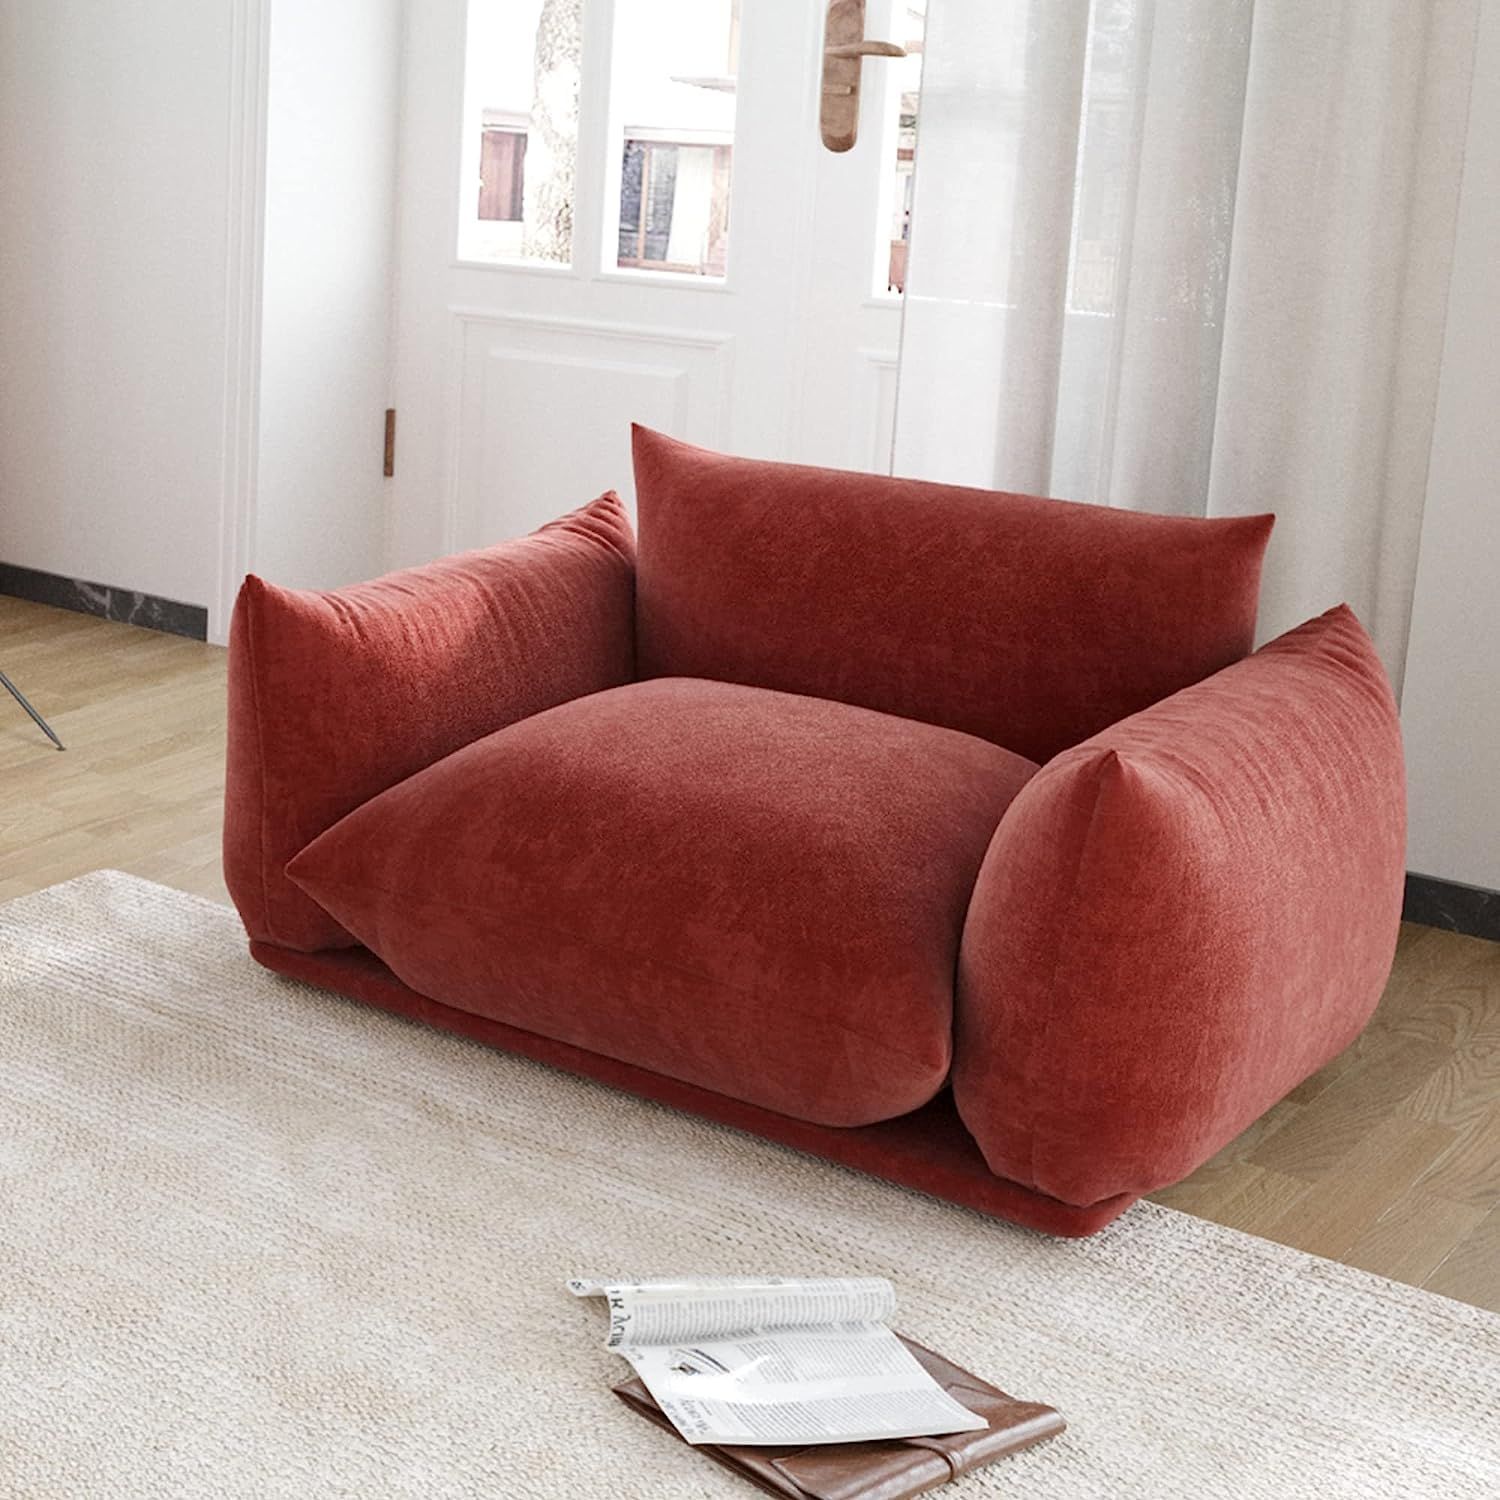 Factors to consider when buying new sofa
sets